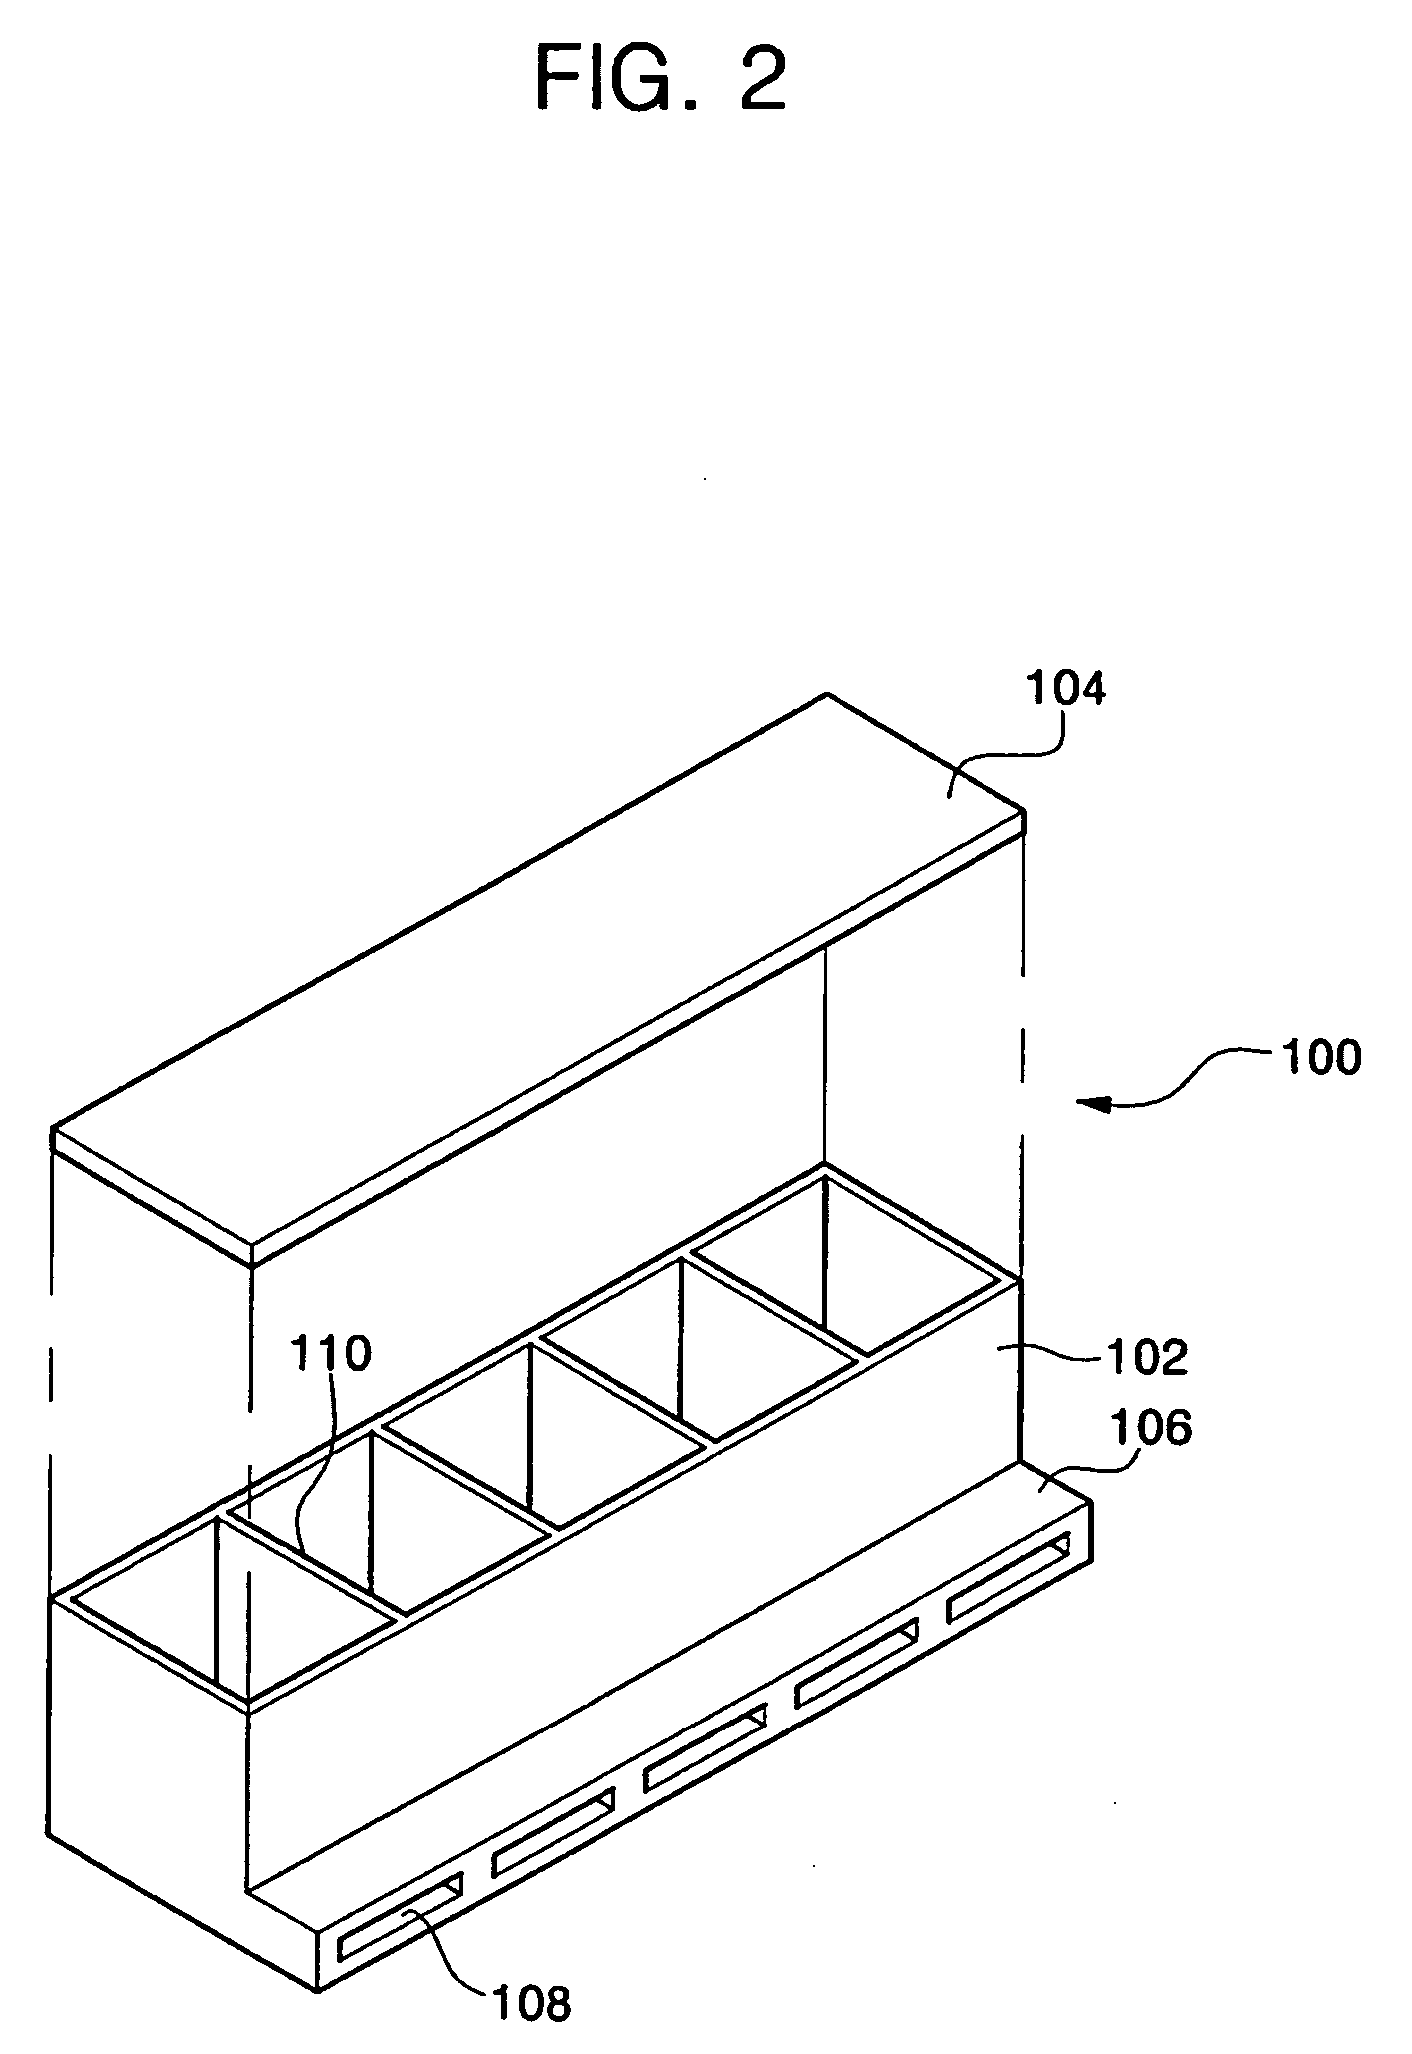 Ink cartridge usable with a wide array type printer head